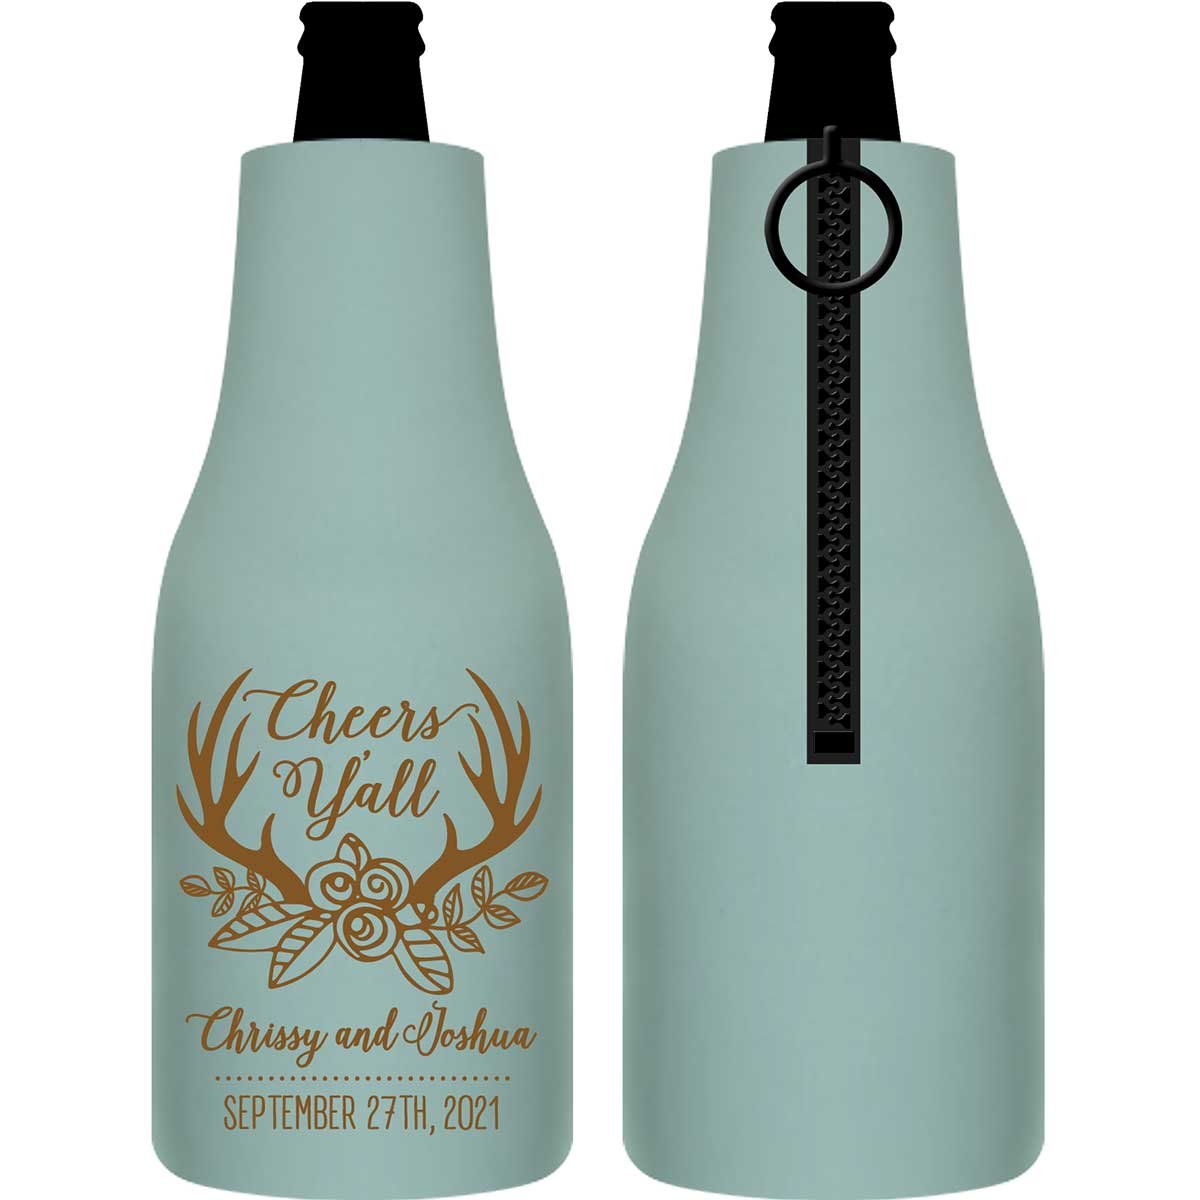 Cheers Y'All 1A Country Wedding Foldable Zippered Bottle Koozies Wedding Gifts for Guests